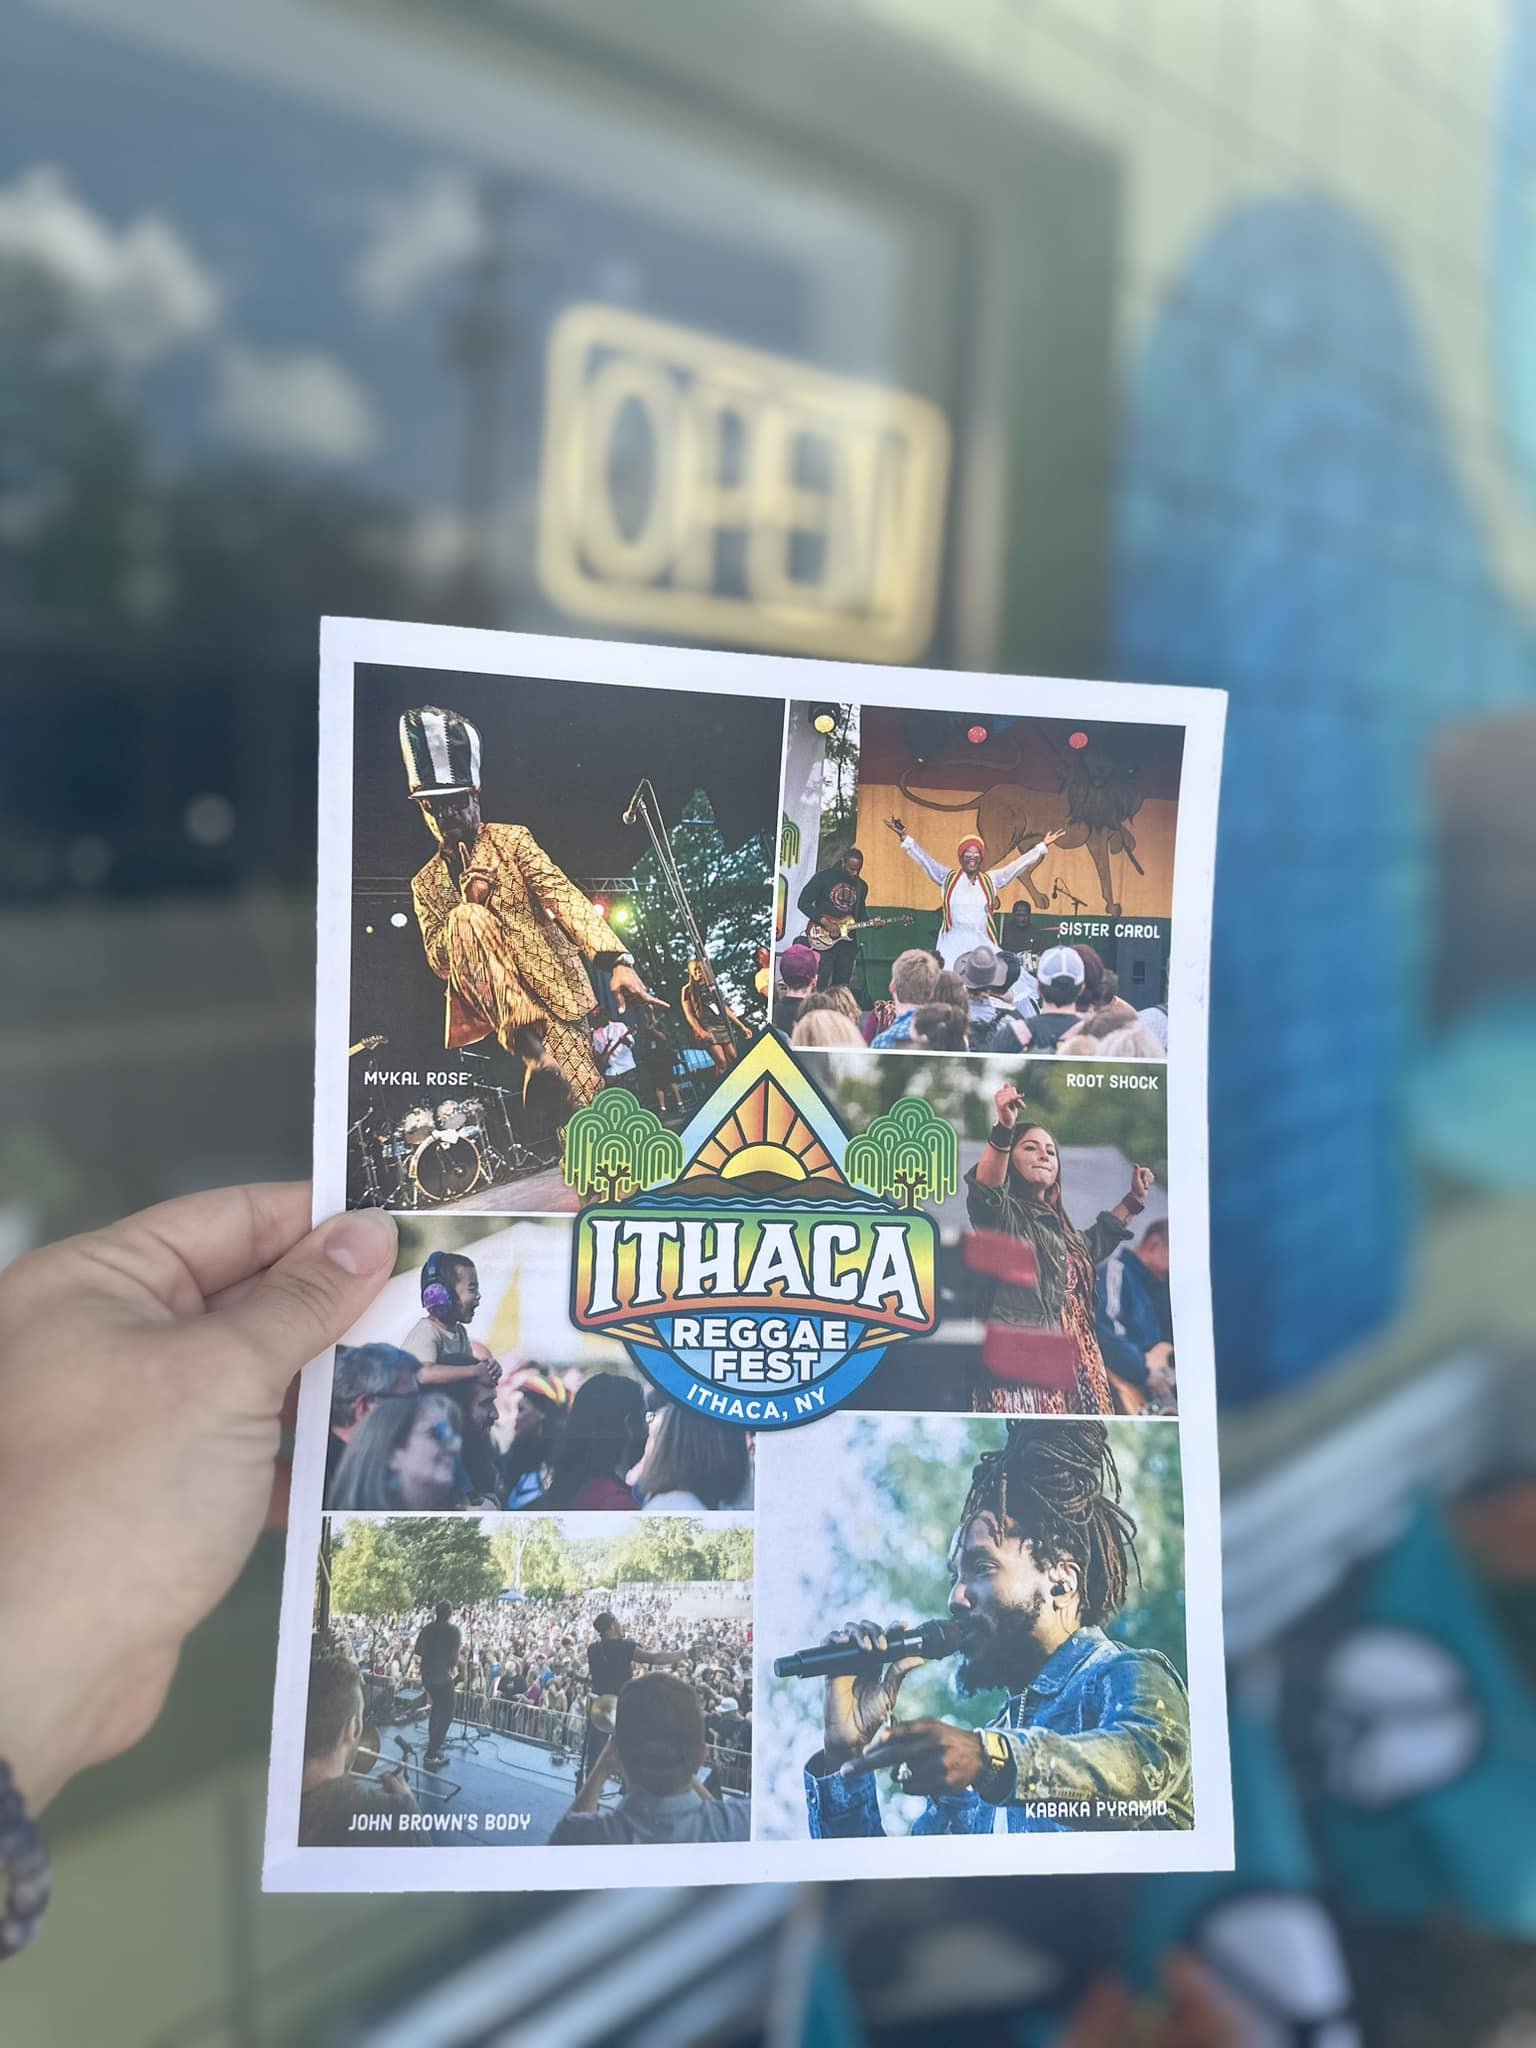 Reggae Fest is coming up in June! 🎶🌈✨
HOMETOWN Weekends June event includes your ticket! 
Come hang out with us in our hometown, #ITHACA

FRIDAY &bull; June 21st
Come together for a full evening of studio classes or workshops as we open our weekend